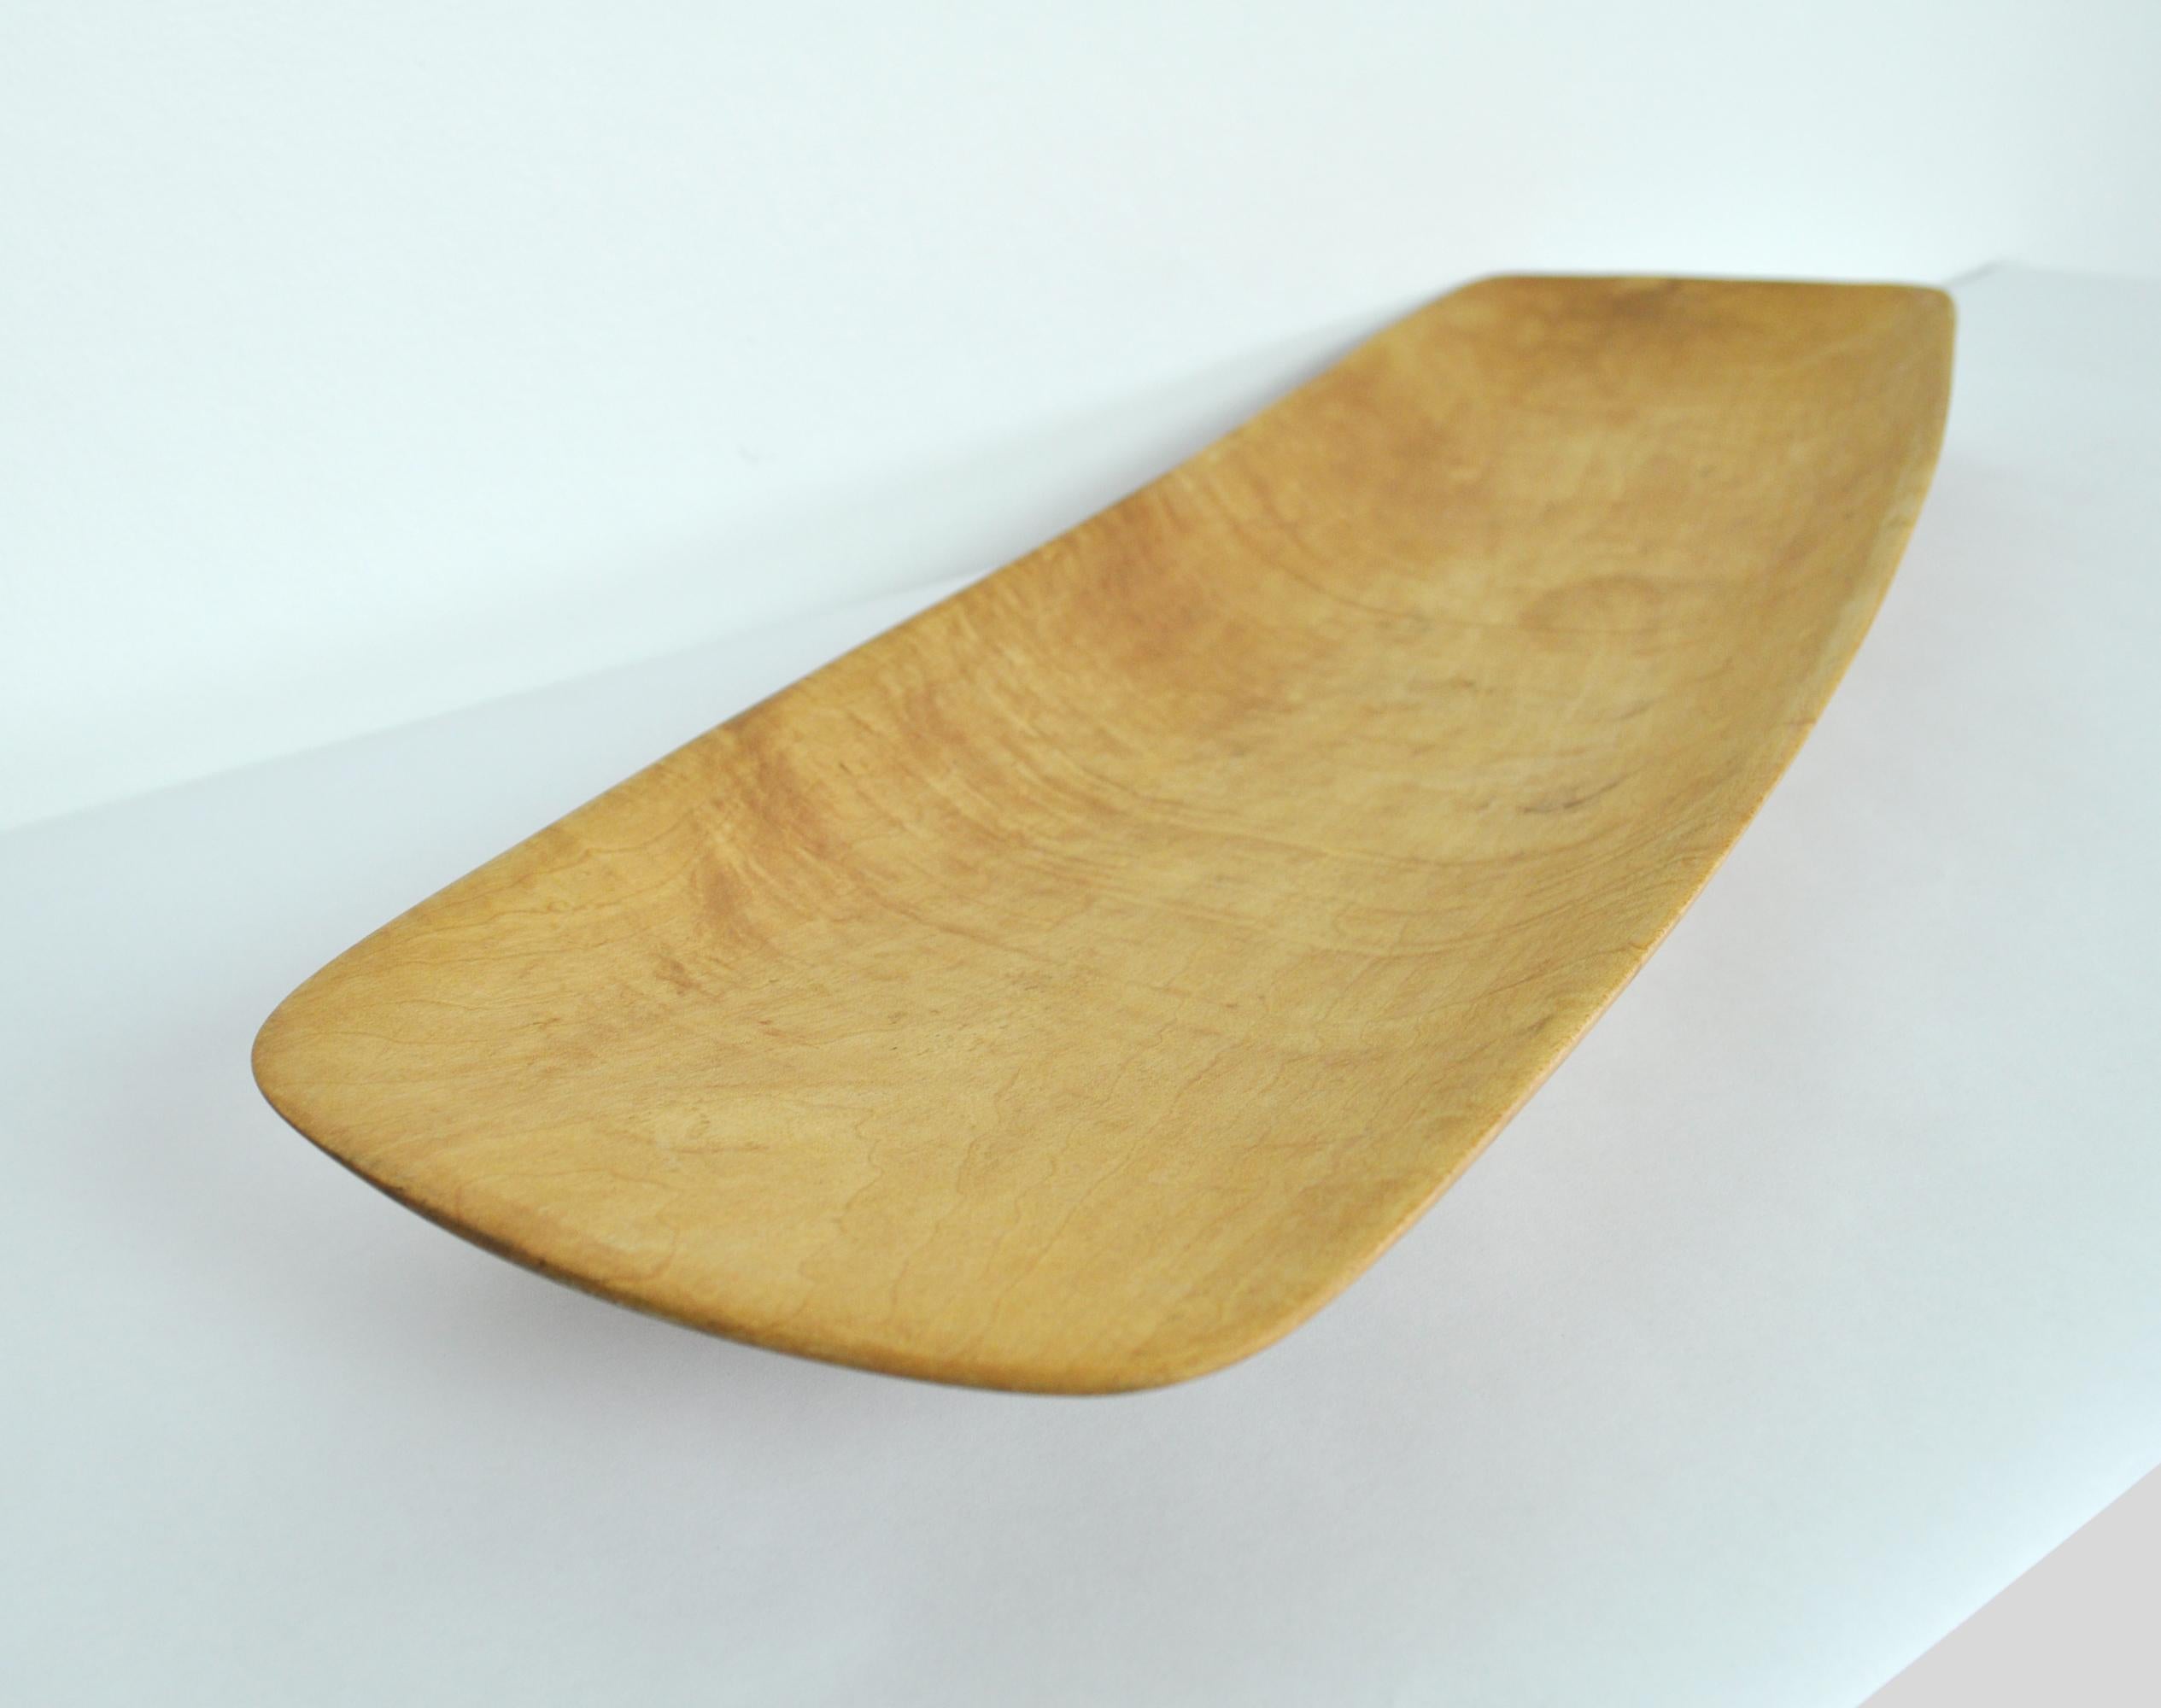 Handcrafted Danish Birch Dish with an Organic Design, 1960s For Sale 6